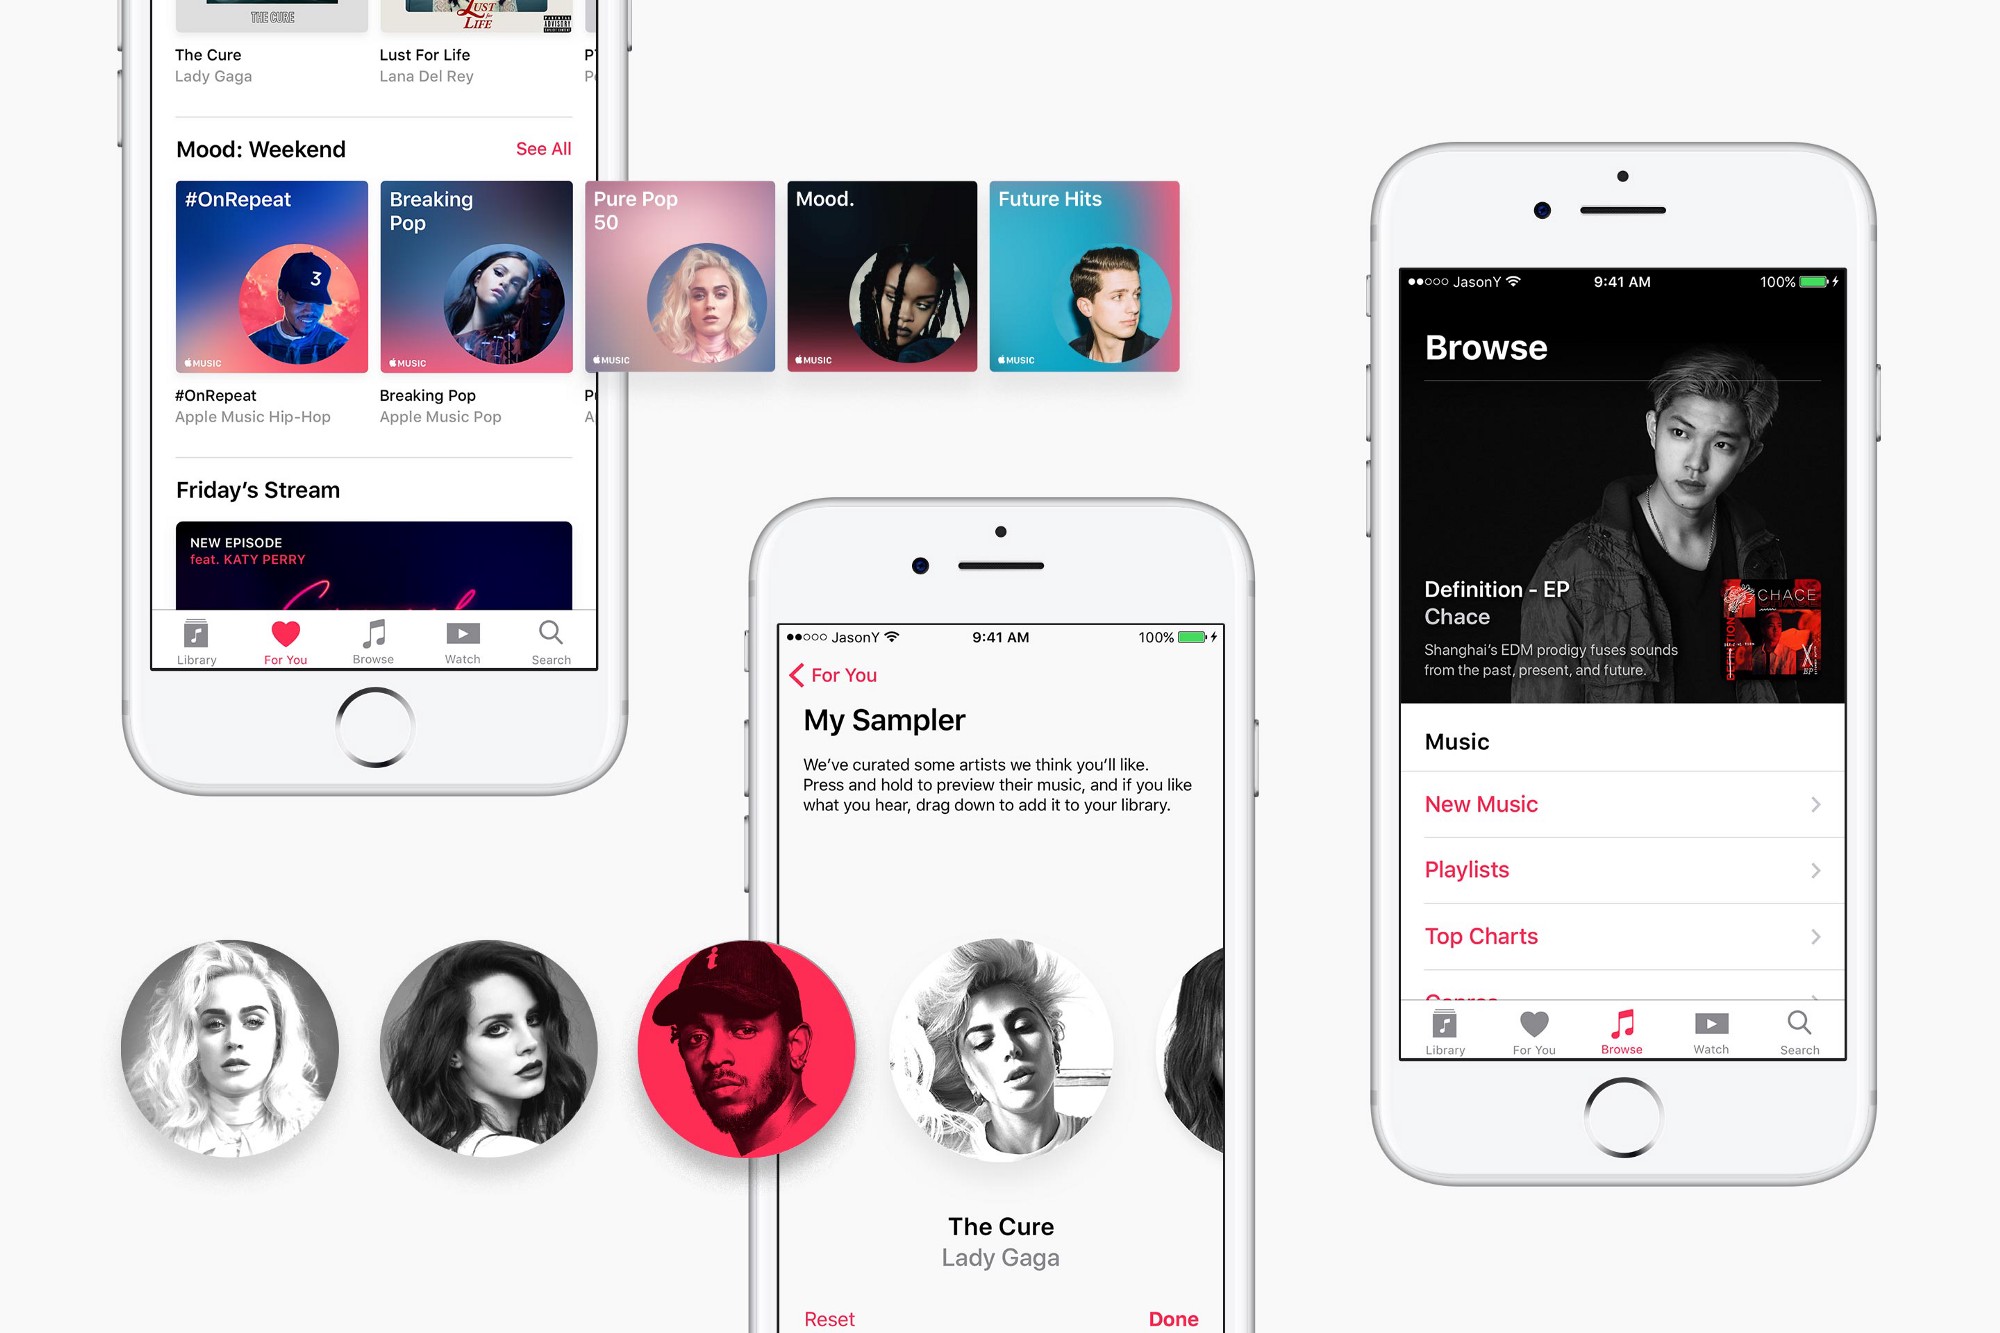 Student rejected by Apple on internship program creates beautiful redesign proposal for Apple Music